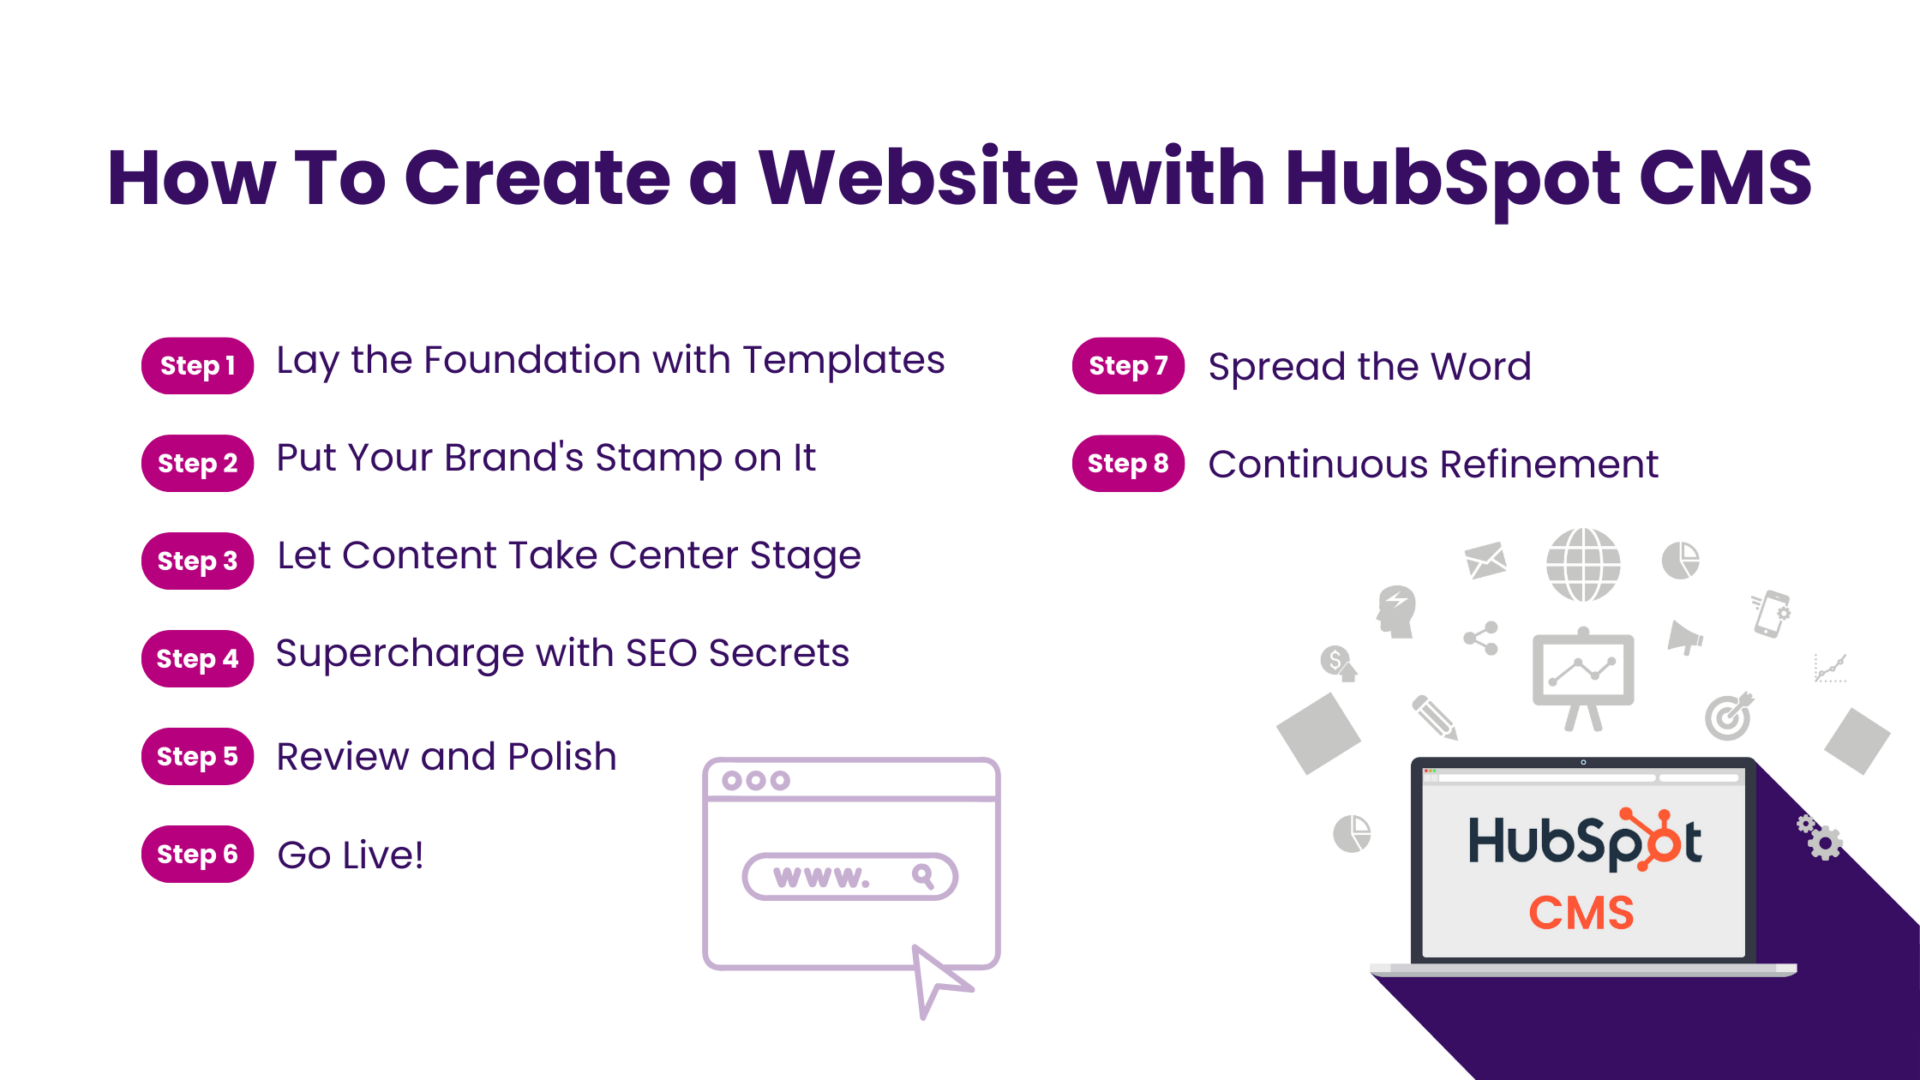 How To Create a Website with HubSpot CMS